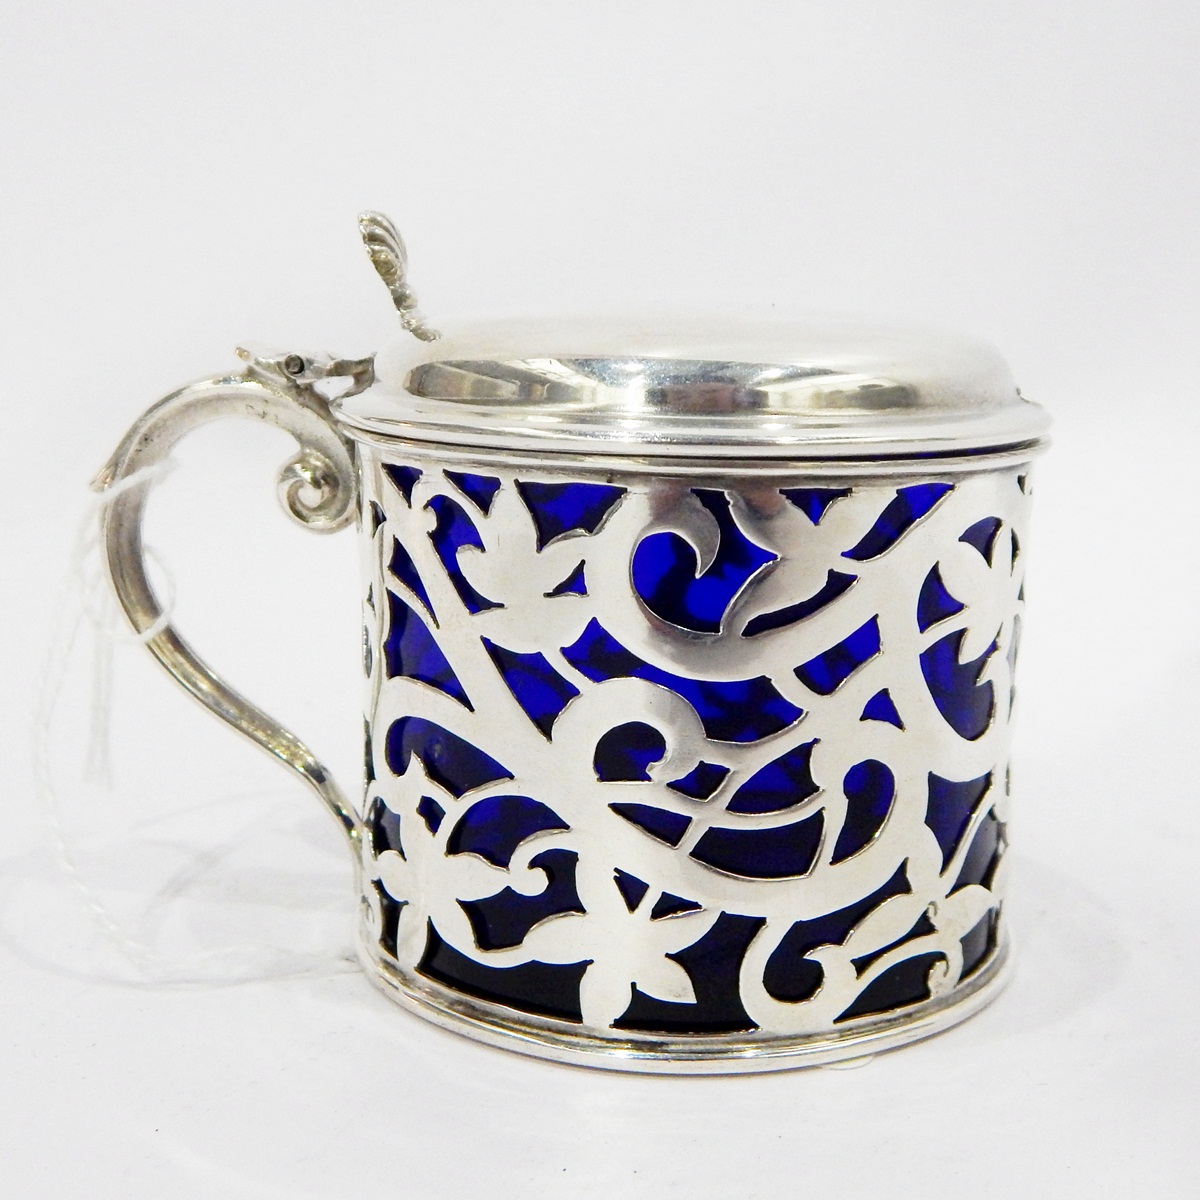 Early 20th century silver mustard pot with blue glass liner, floral pierced decoration,